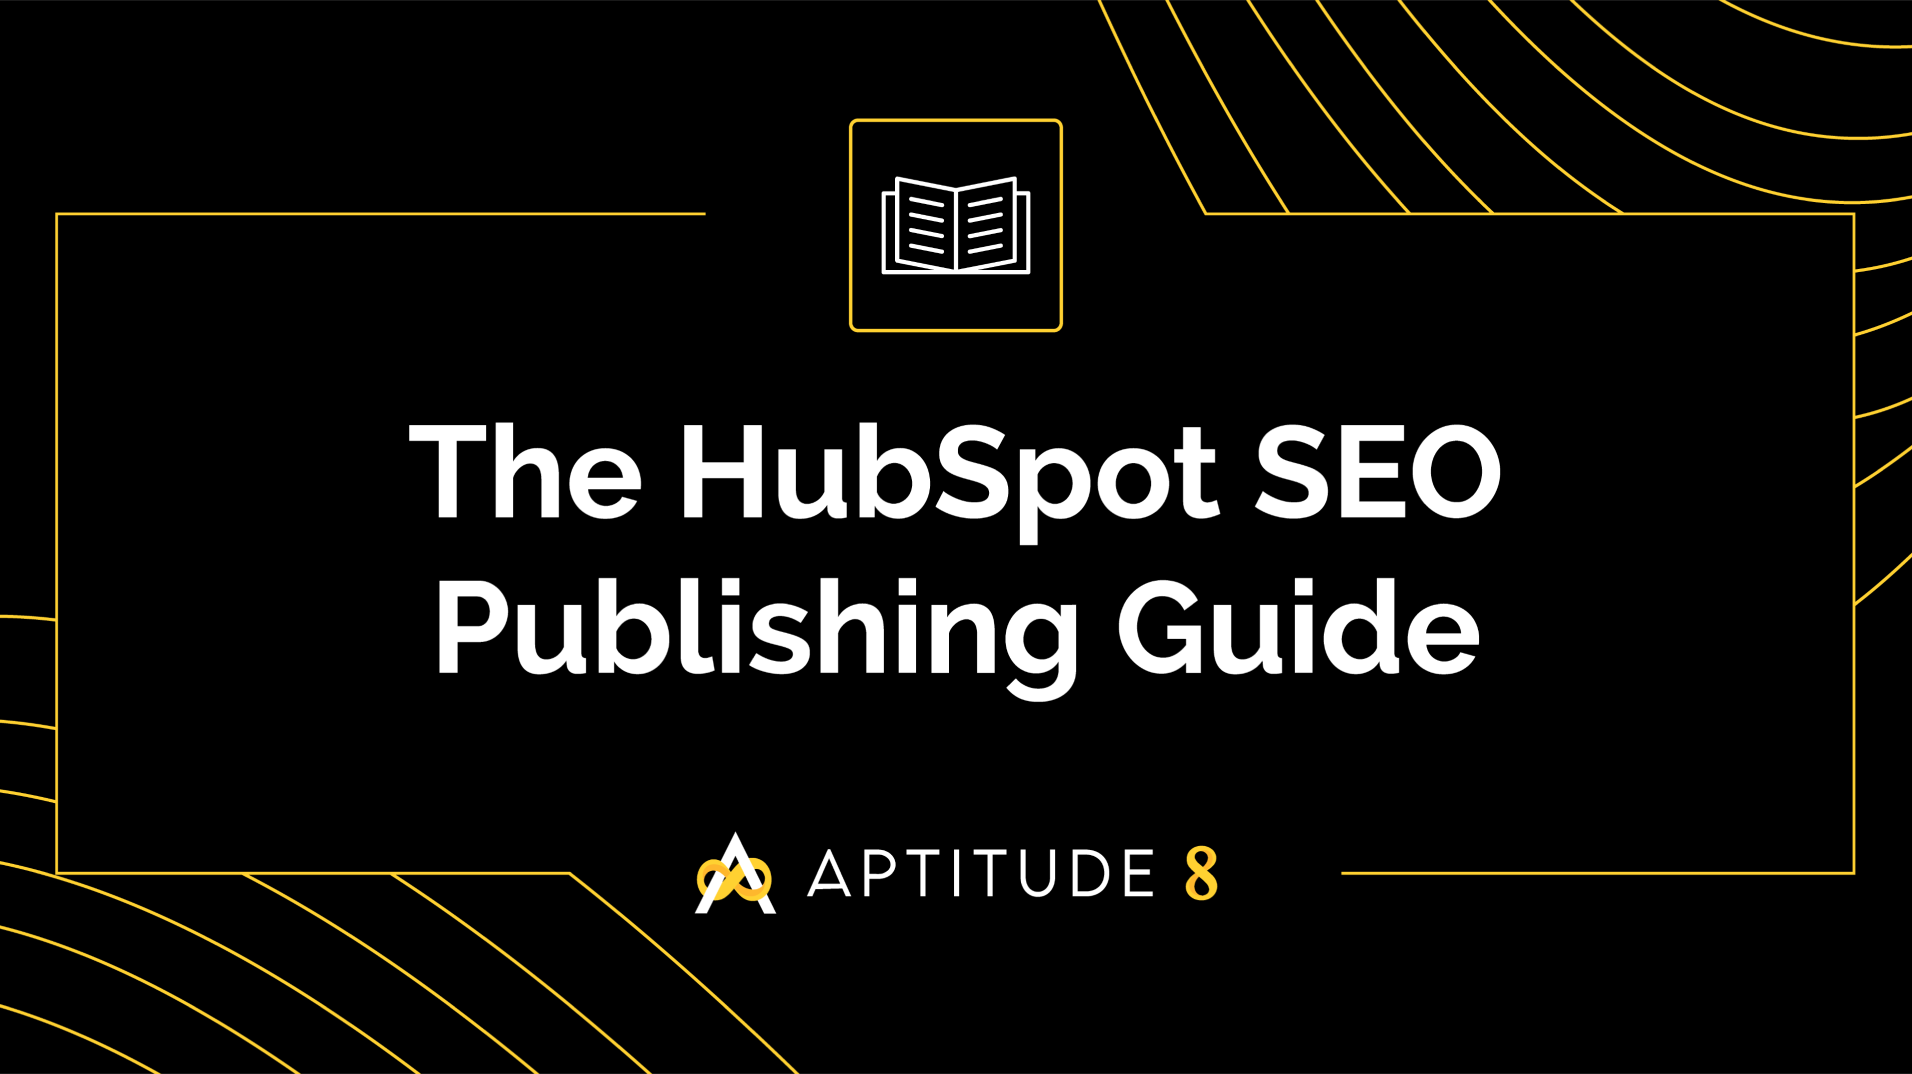 HubSpot SEO Publishing Guide - Guide - Feature Image